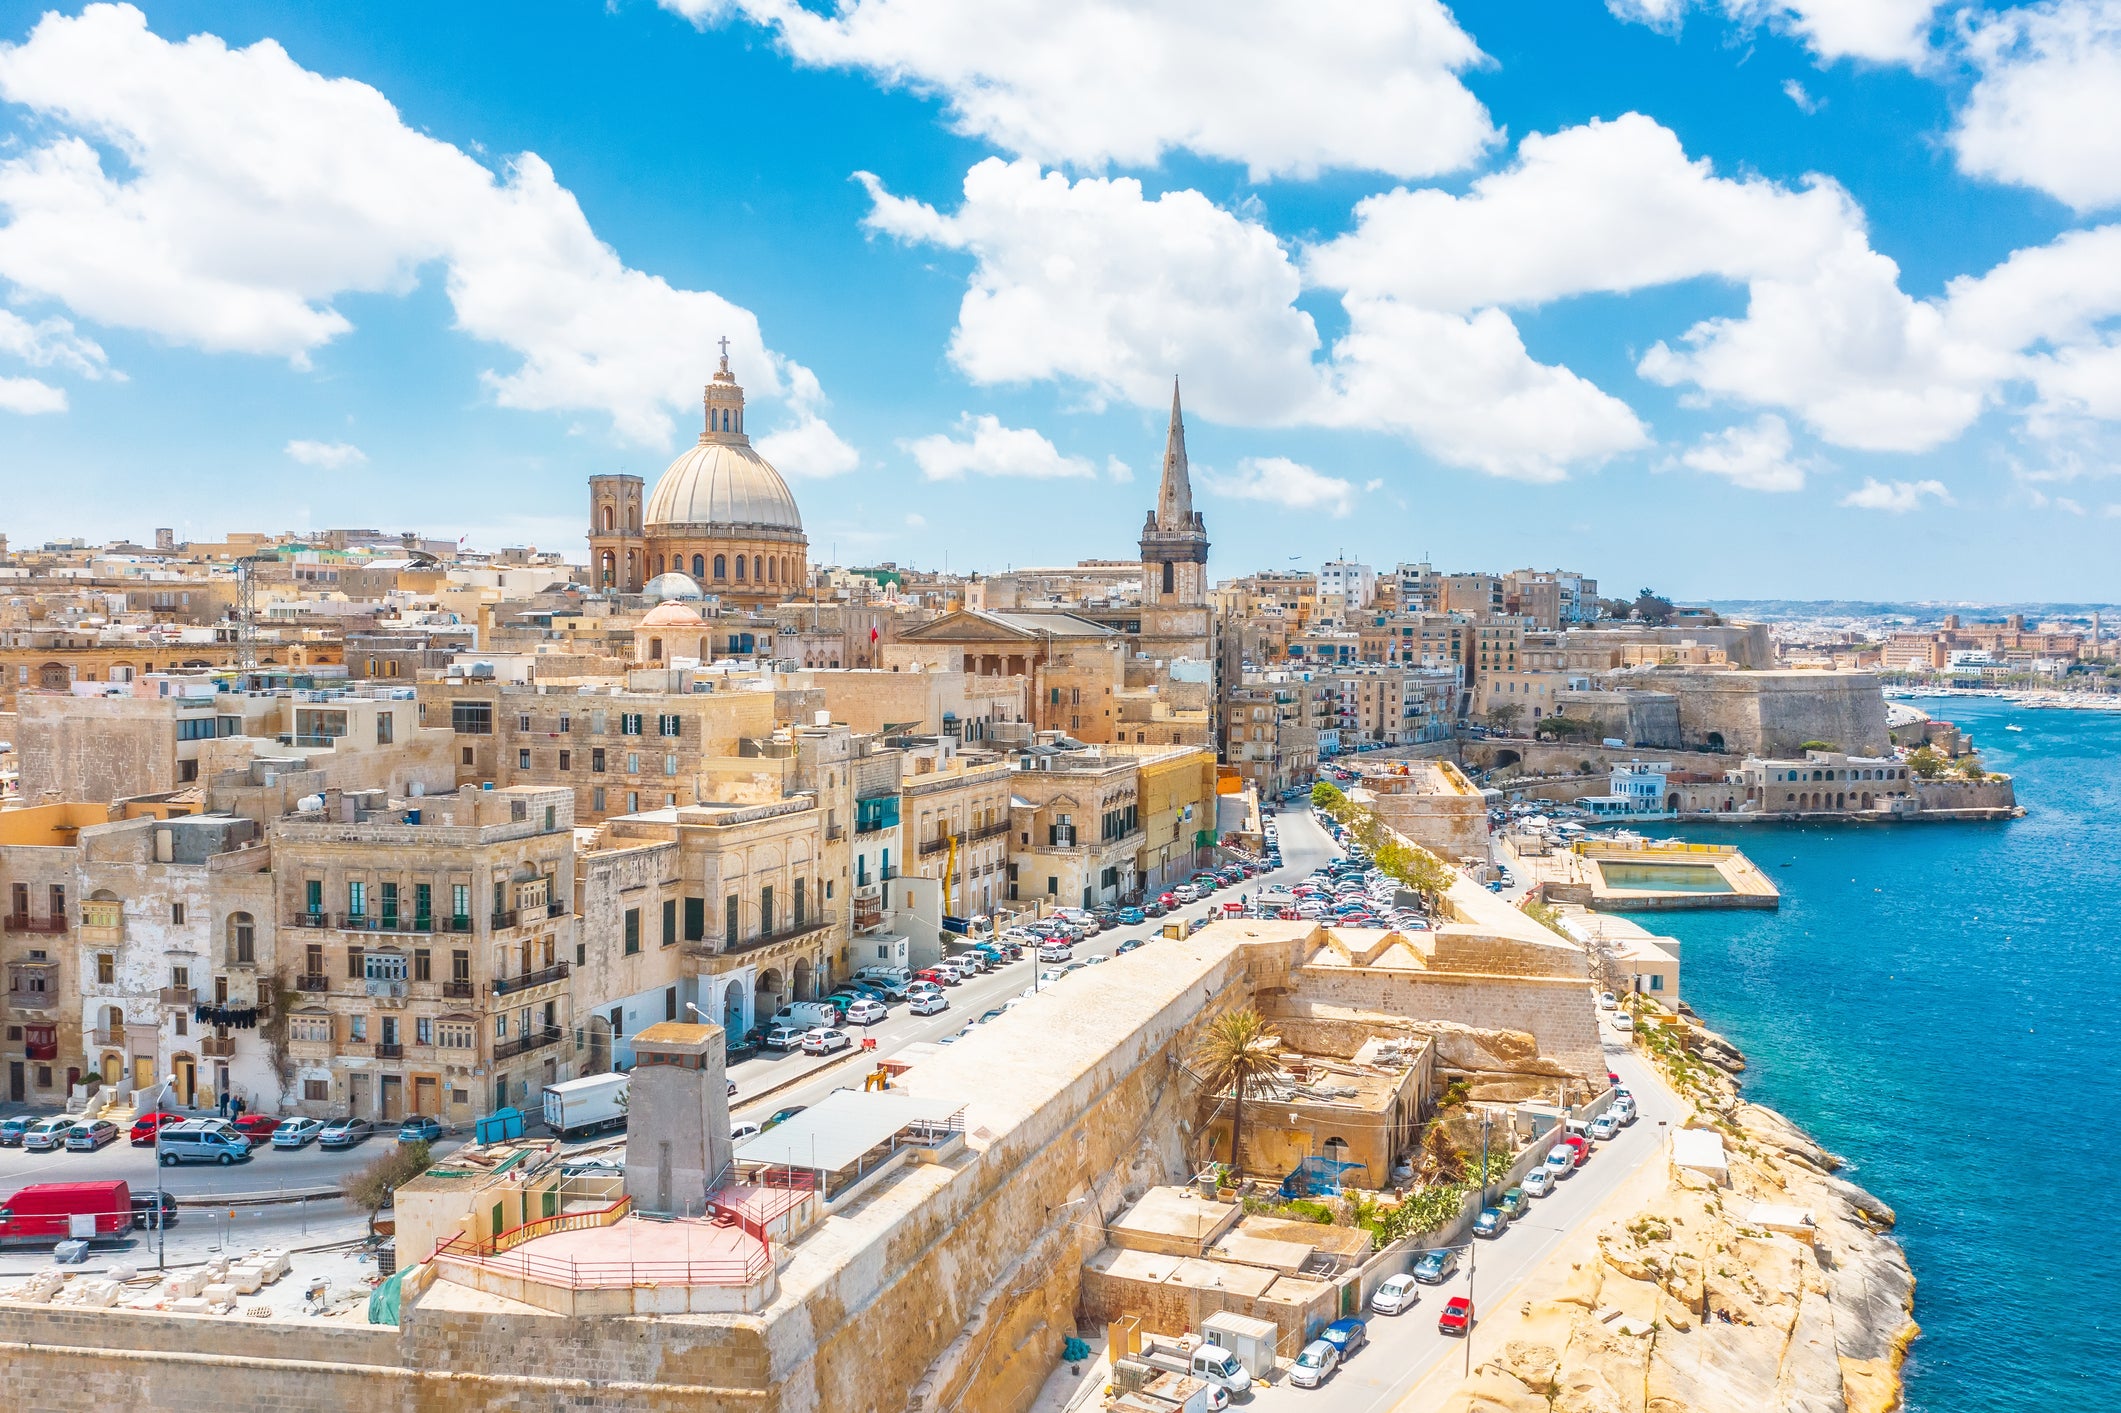 Cross purposes: A Christmas holiday in Malta, flying from Manchester for a week, costs £258 including flights and B&B accommodation